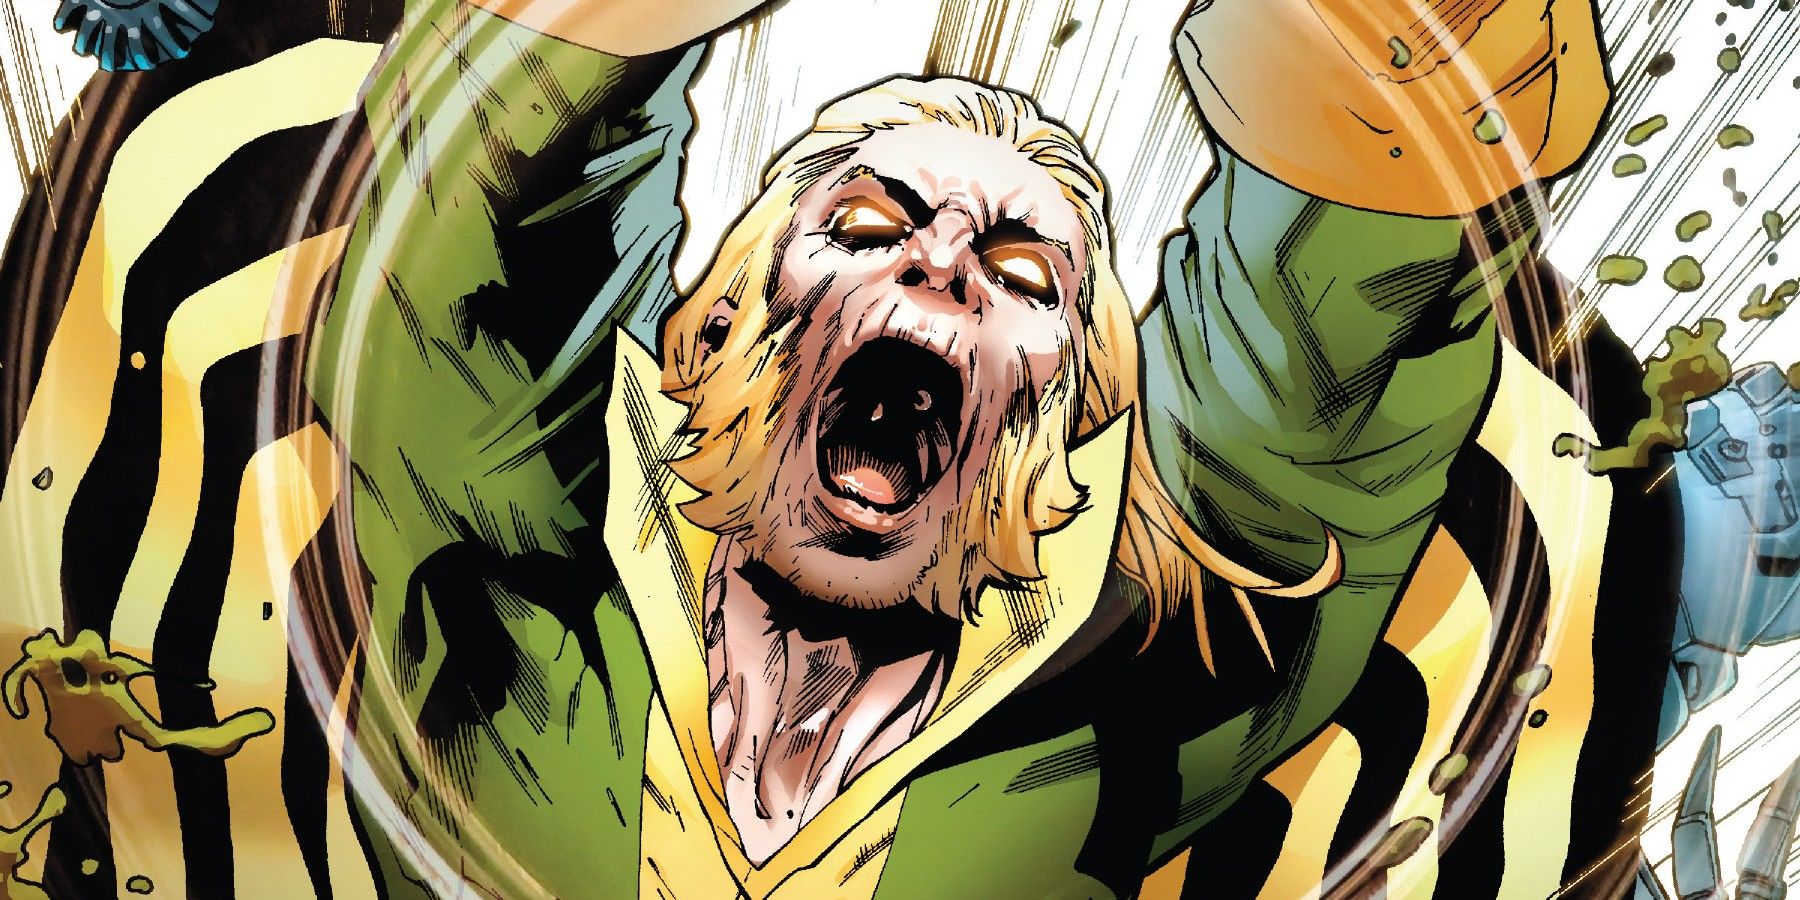 Banshee in his altered state from being a Horseman of Apocalypse in 2018's Astonishing X-Men #13